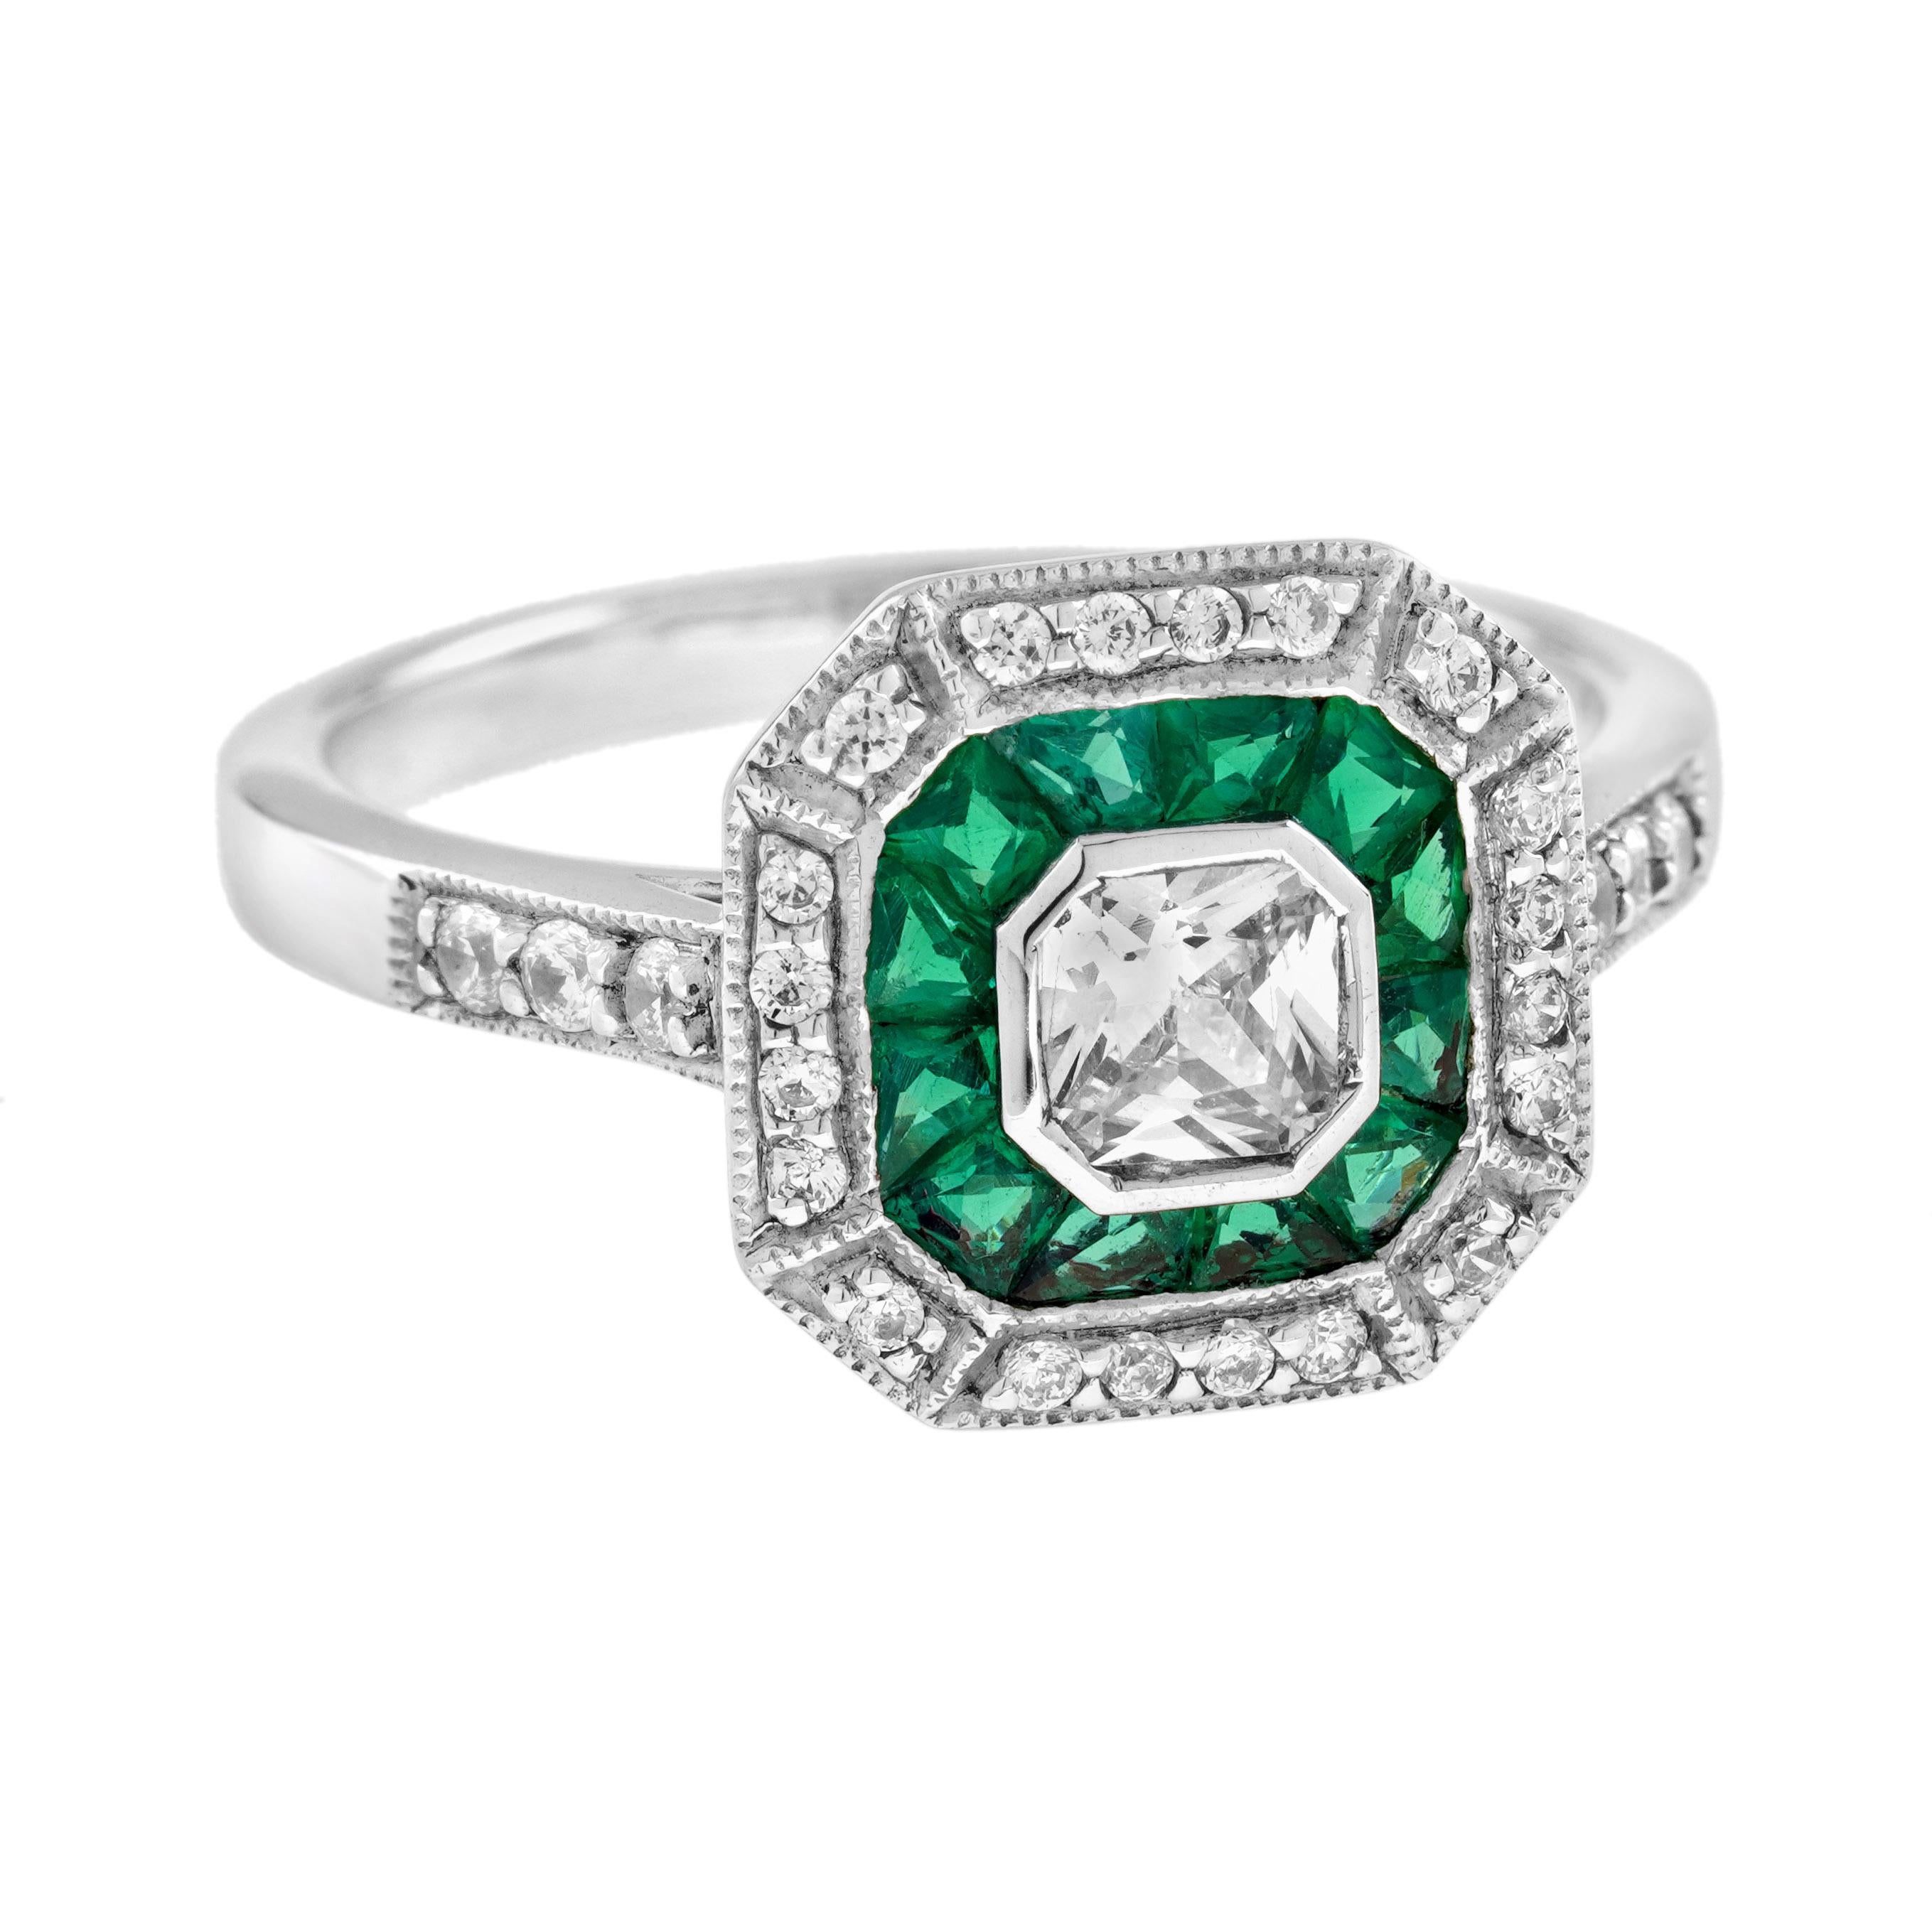 For Sale:  Diamond and Emerald Double Halo Art Deco Style Engagement Ring in 18K White Gold 3